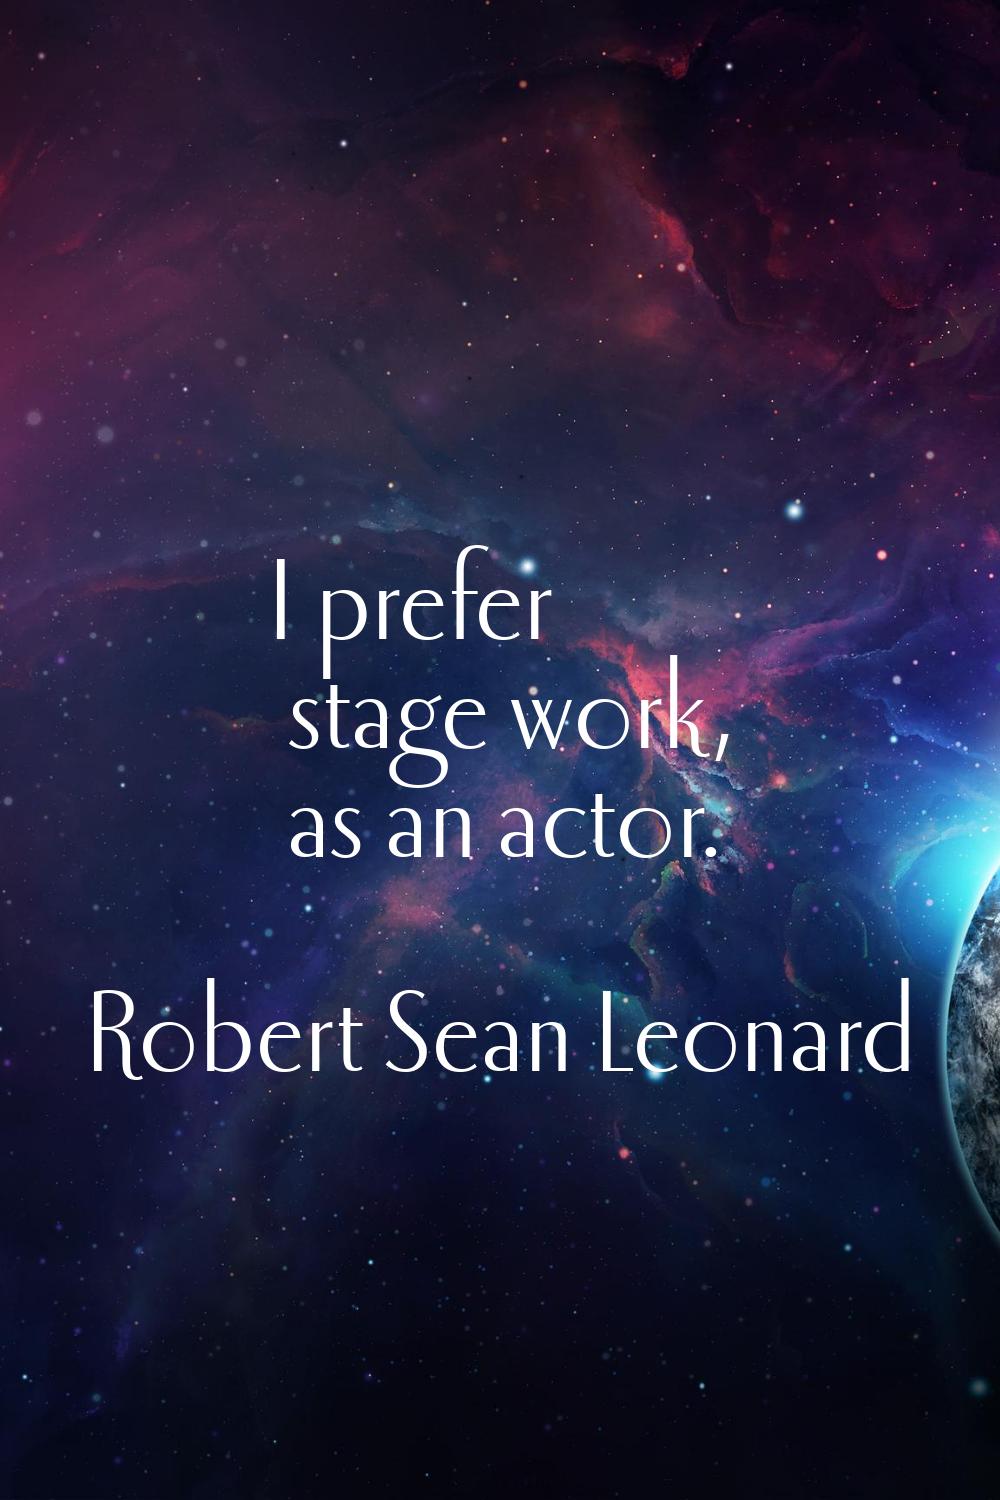 I prefer stage work, as an actor.